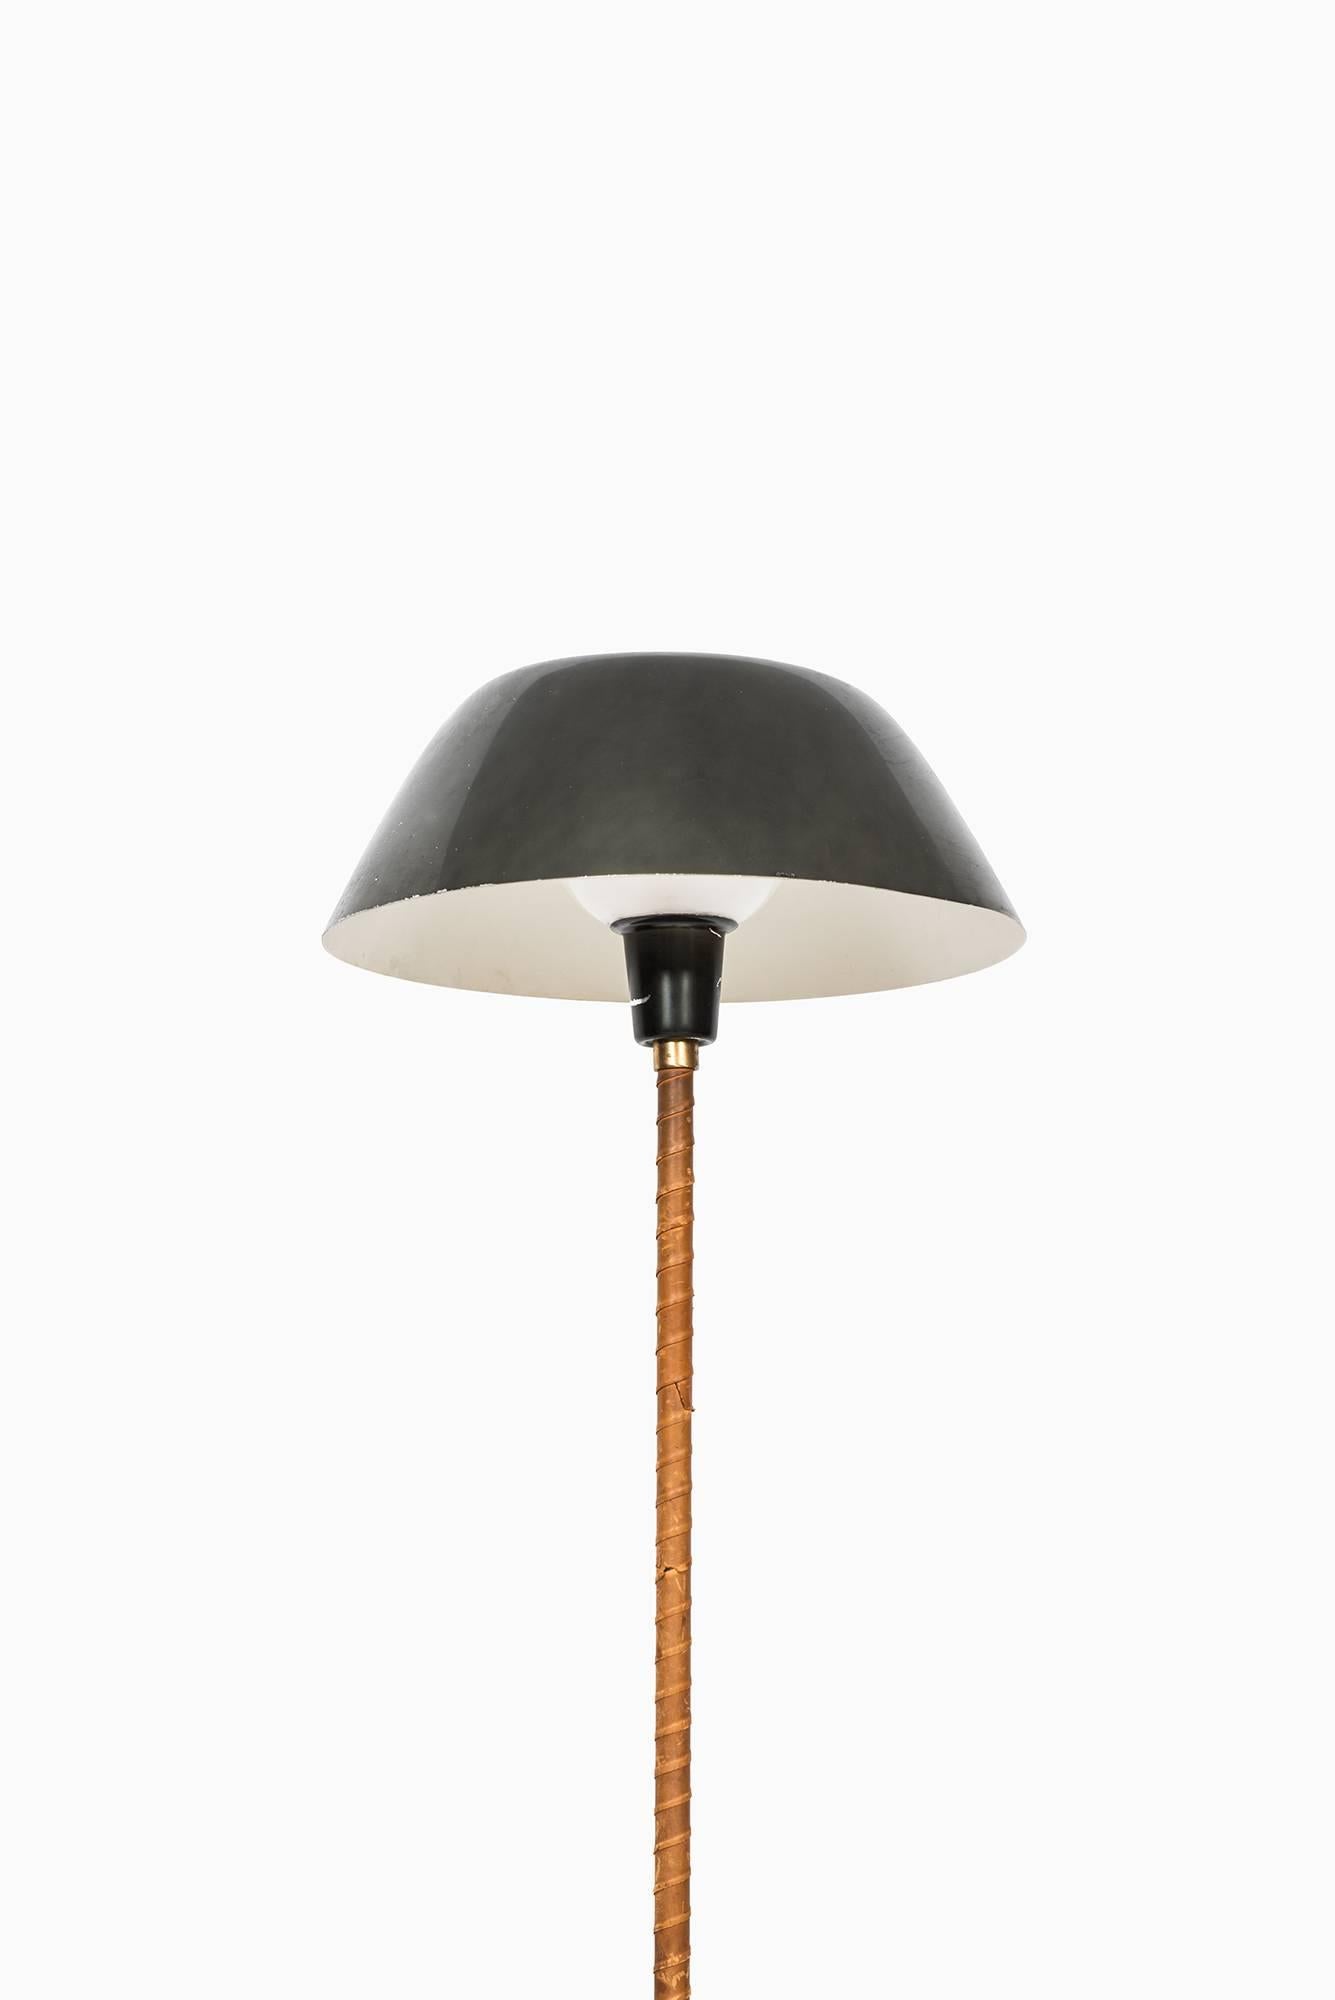 Leather Lisa Johansson Pape Floor Lamp by Orno in Finland